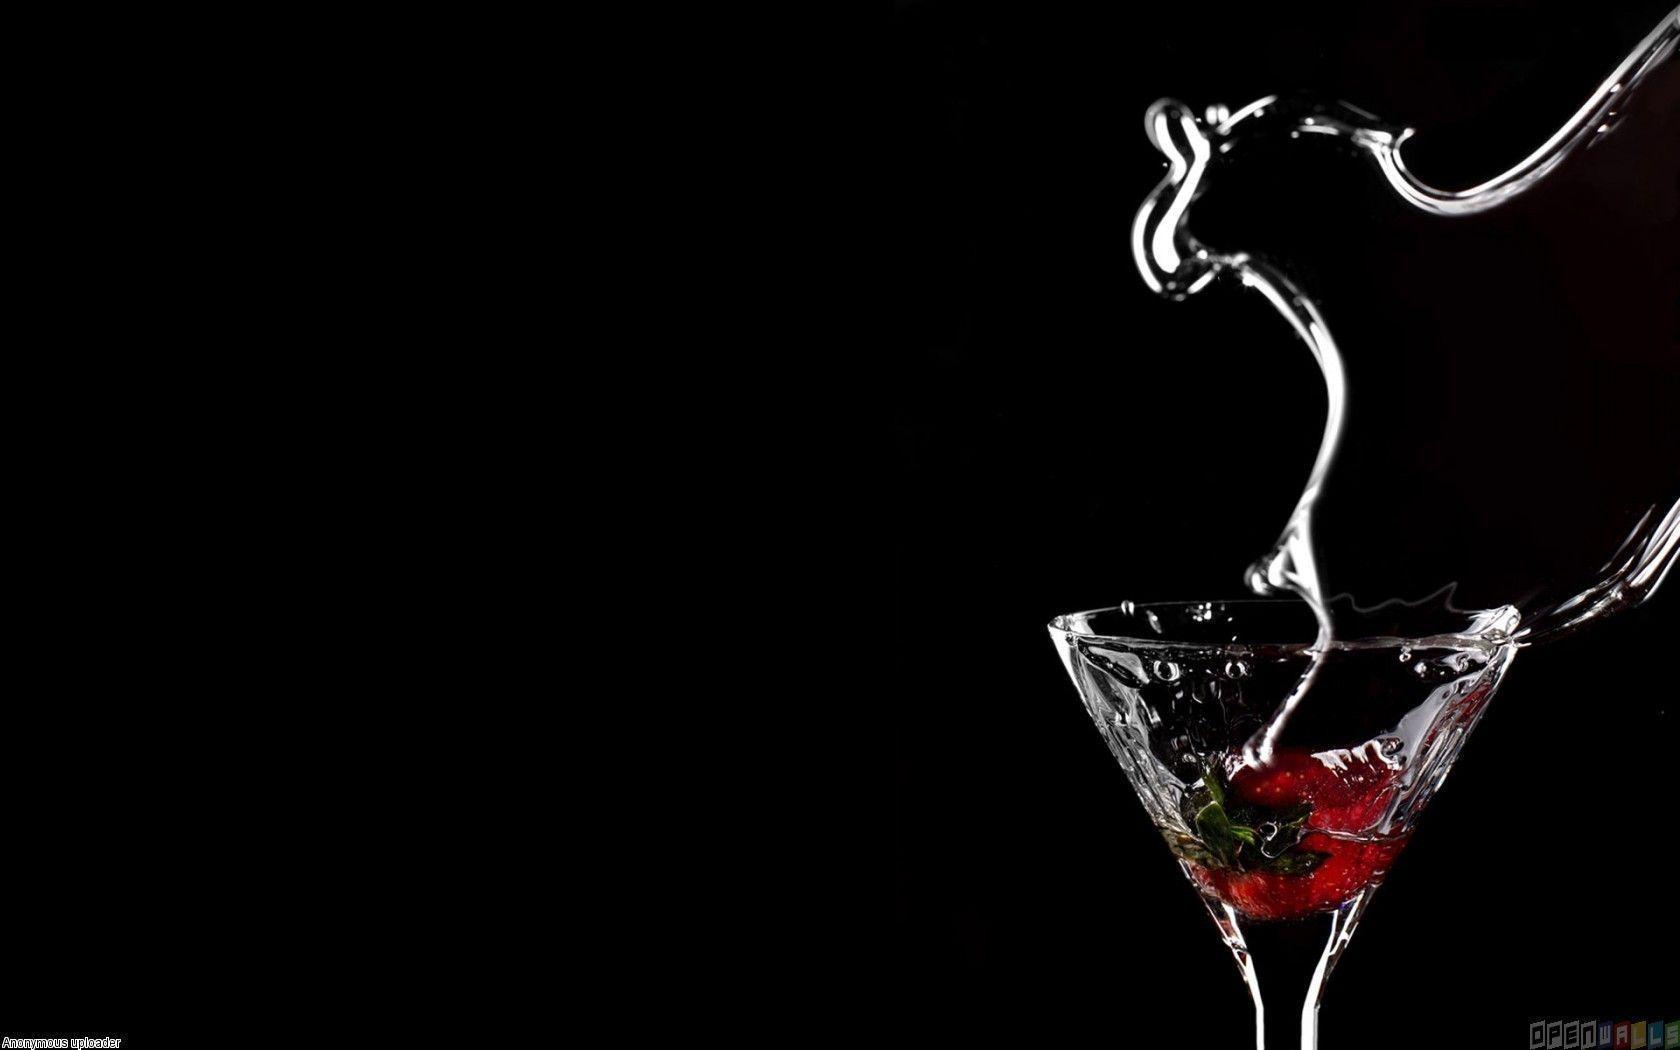 Best image about Cocktail. Black background